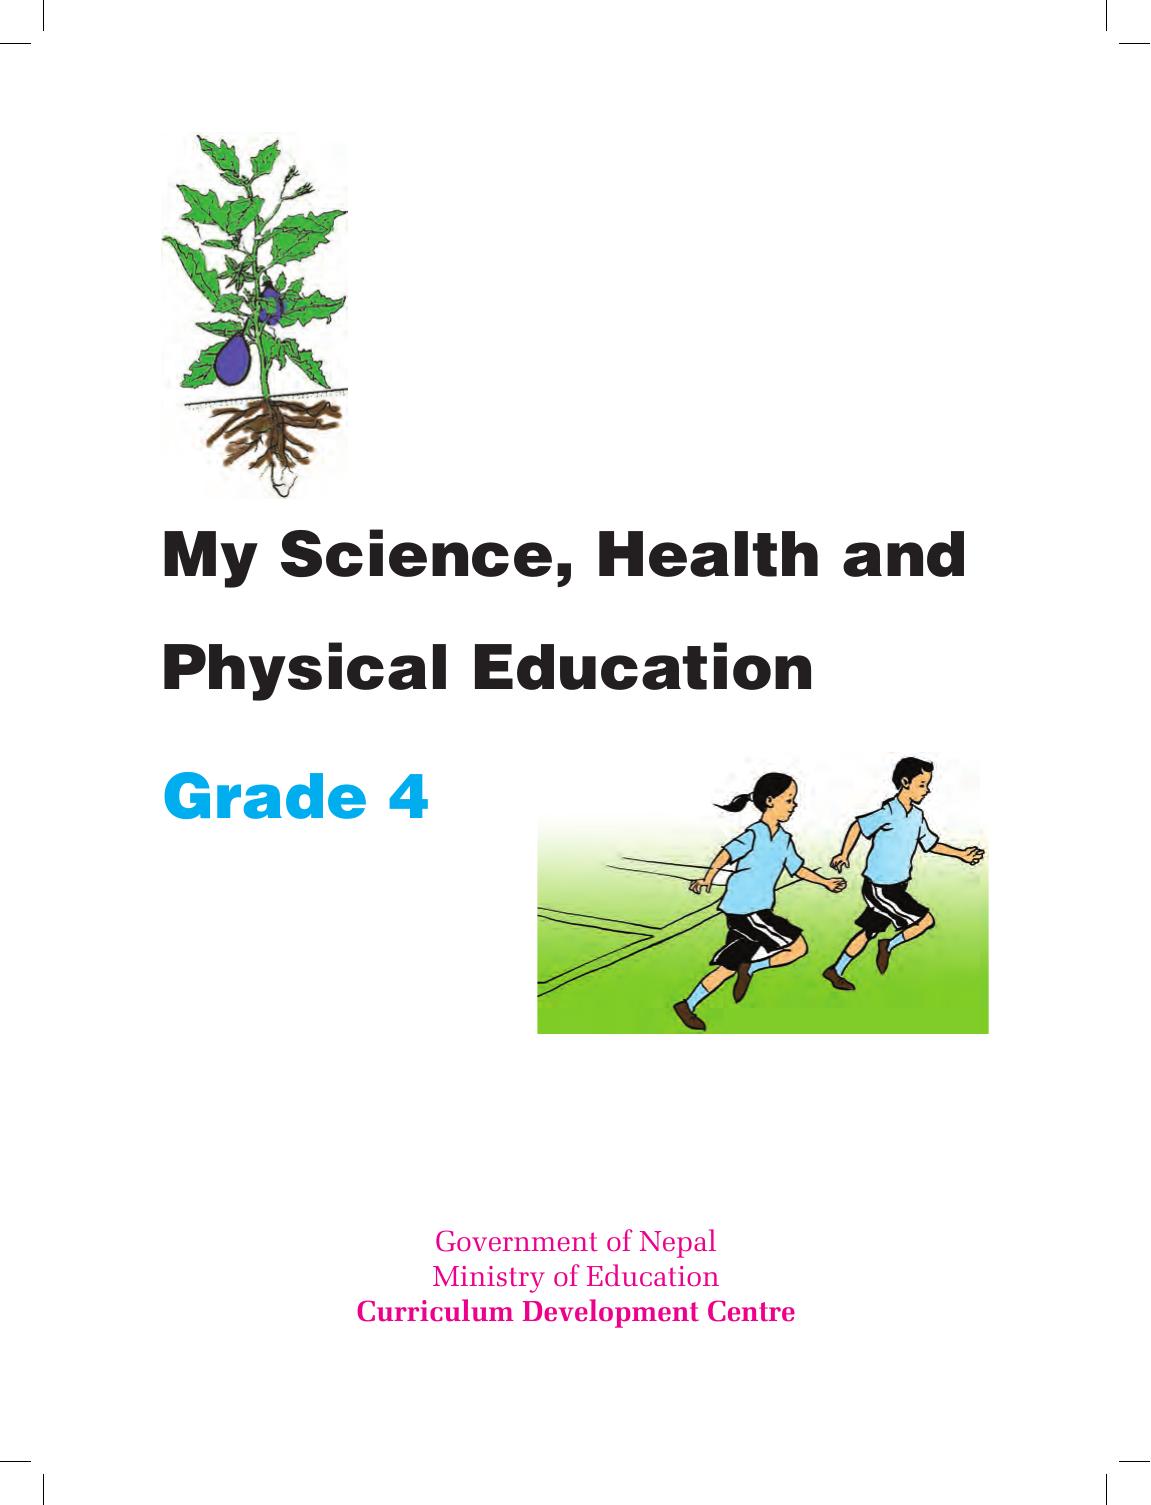 CDC 2018 - My Science Health and Physical Education Grade 4